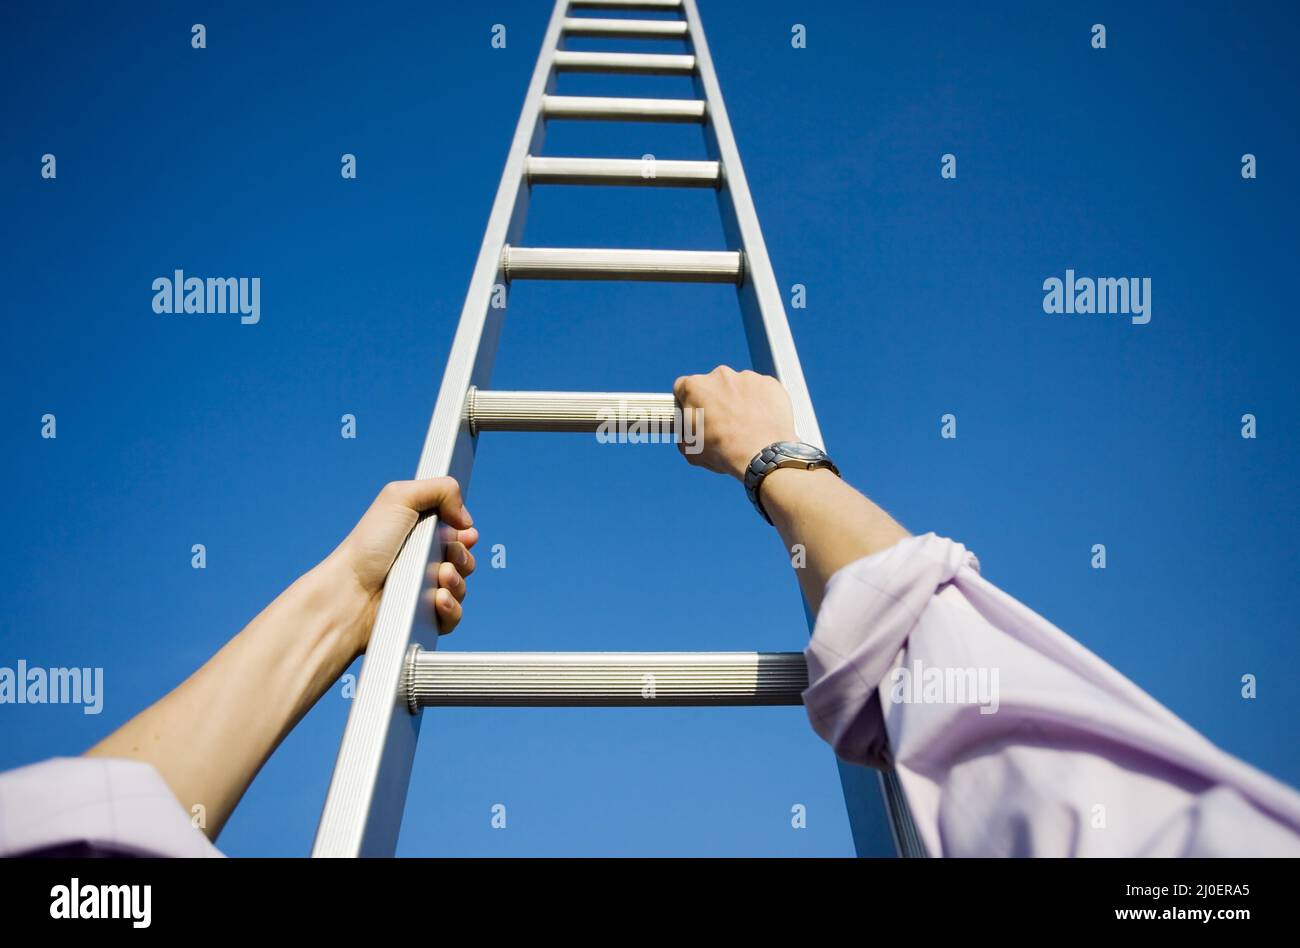 Personal perspective of a businessman climbing a ladder themes of point of view success motivation Stock Photo